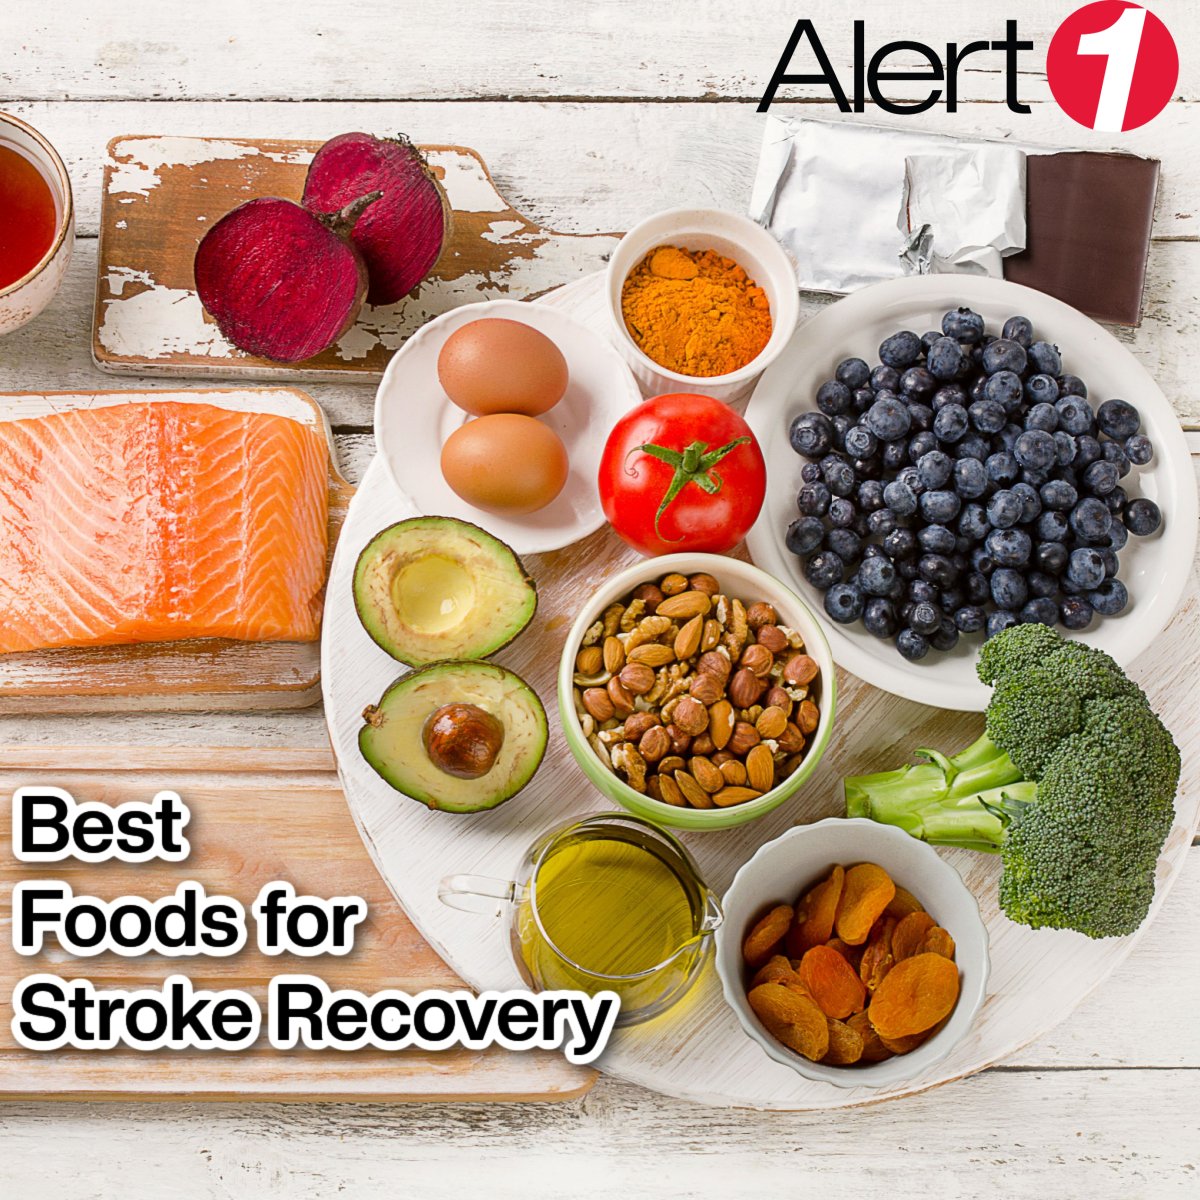 If you’ve suffered a stroke, these are some of the best foods to give you proper nutrition as you recover: bit.ly/3vVRlHX

#stroke #strokesurvivor #strokerecovery #brainhealth #nutrition #nutritionmatters #foodismedicine